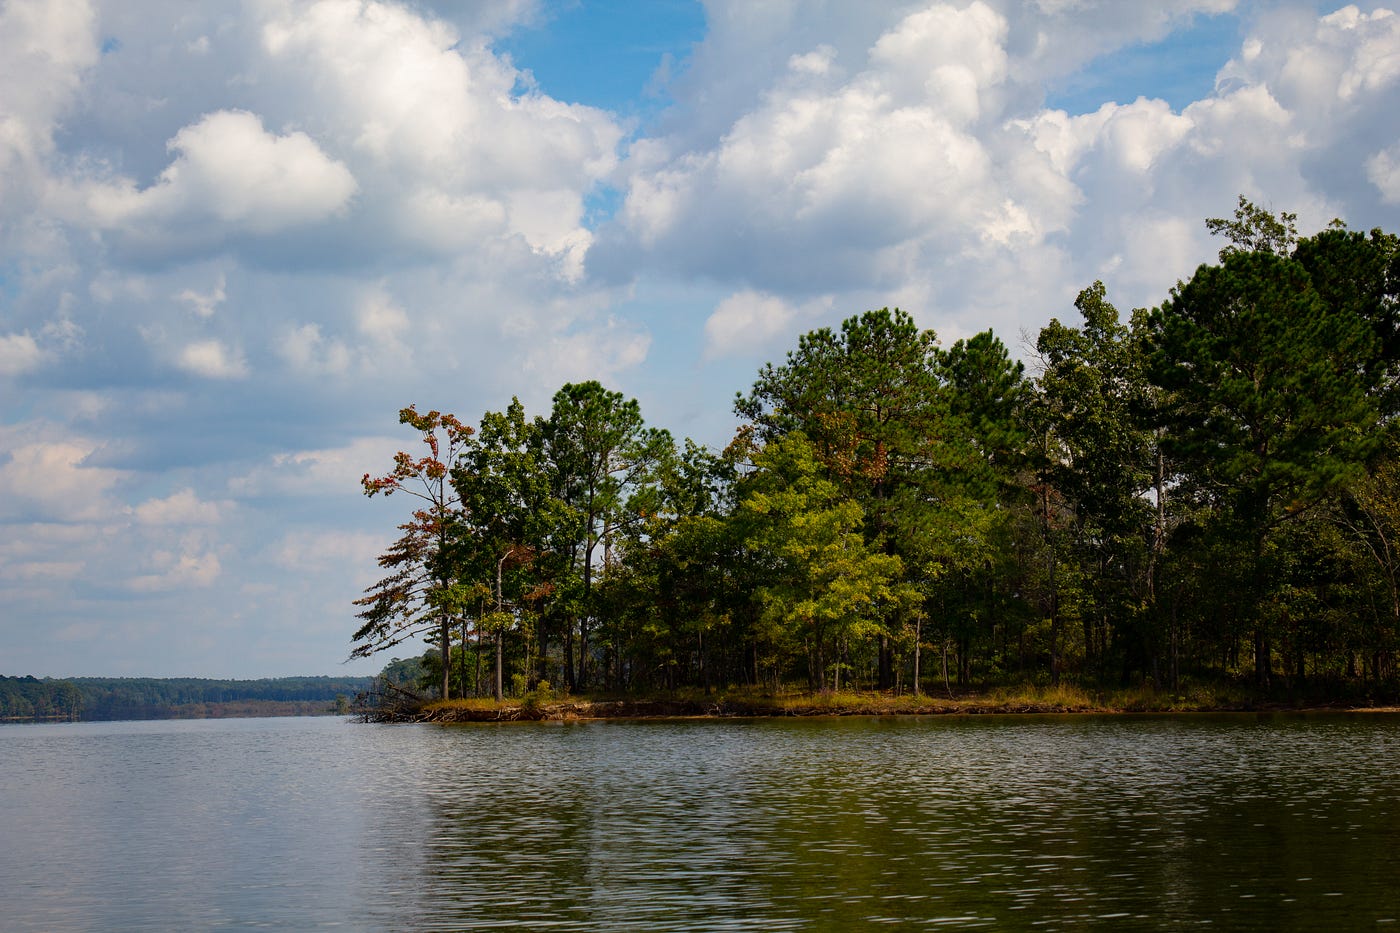 The banks of Jordan Lake in the distance, with green trees and more large, white clouds across the sky.